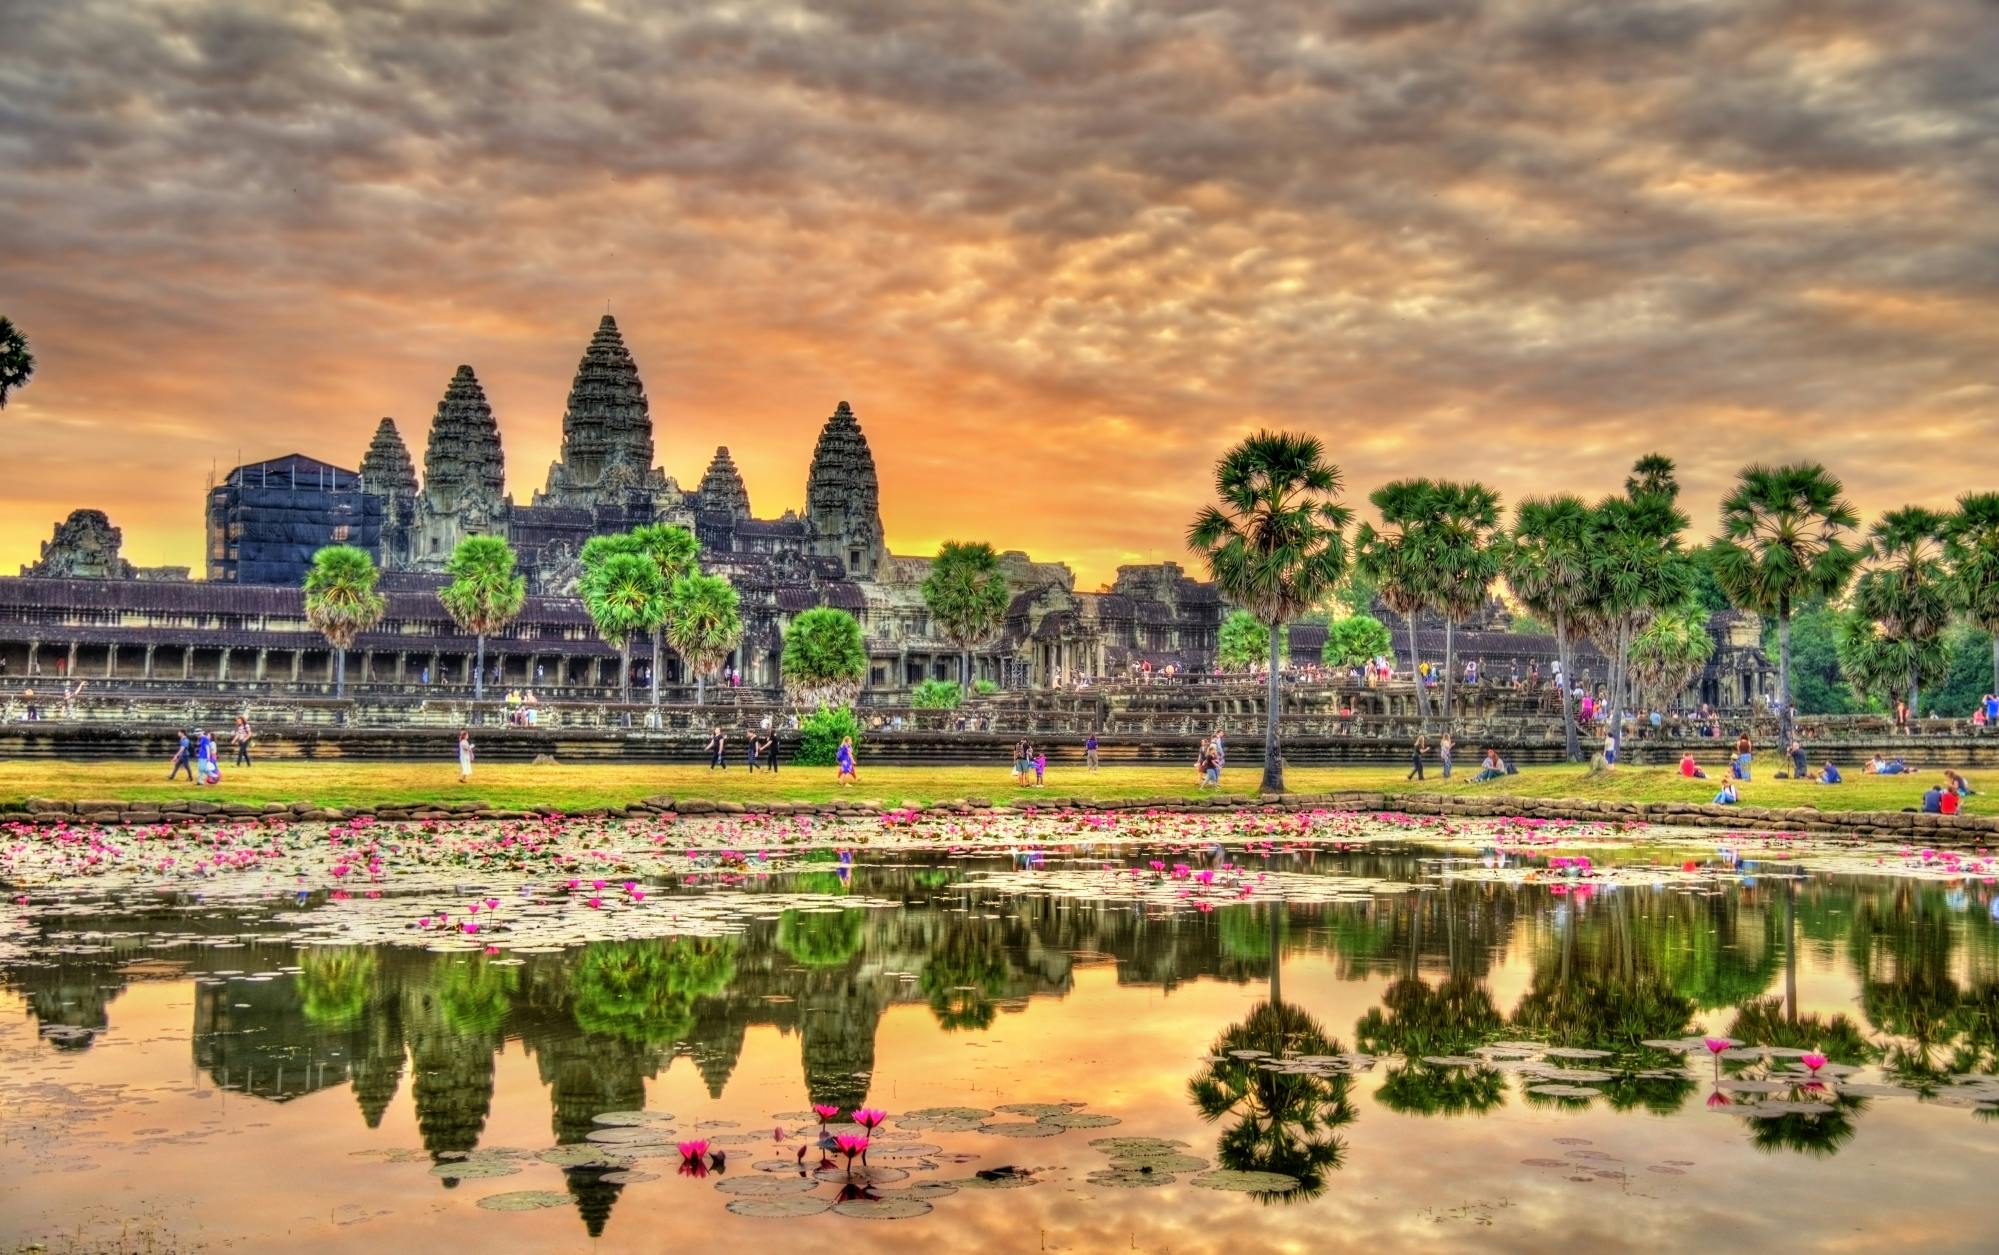 Private one day tour of Angkor Wat Thom and Tomb Raider Musement